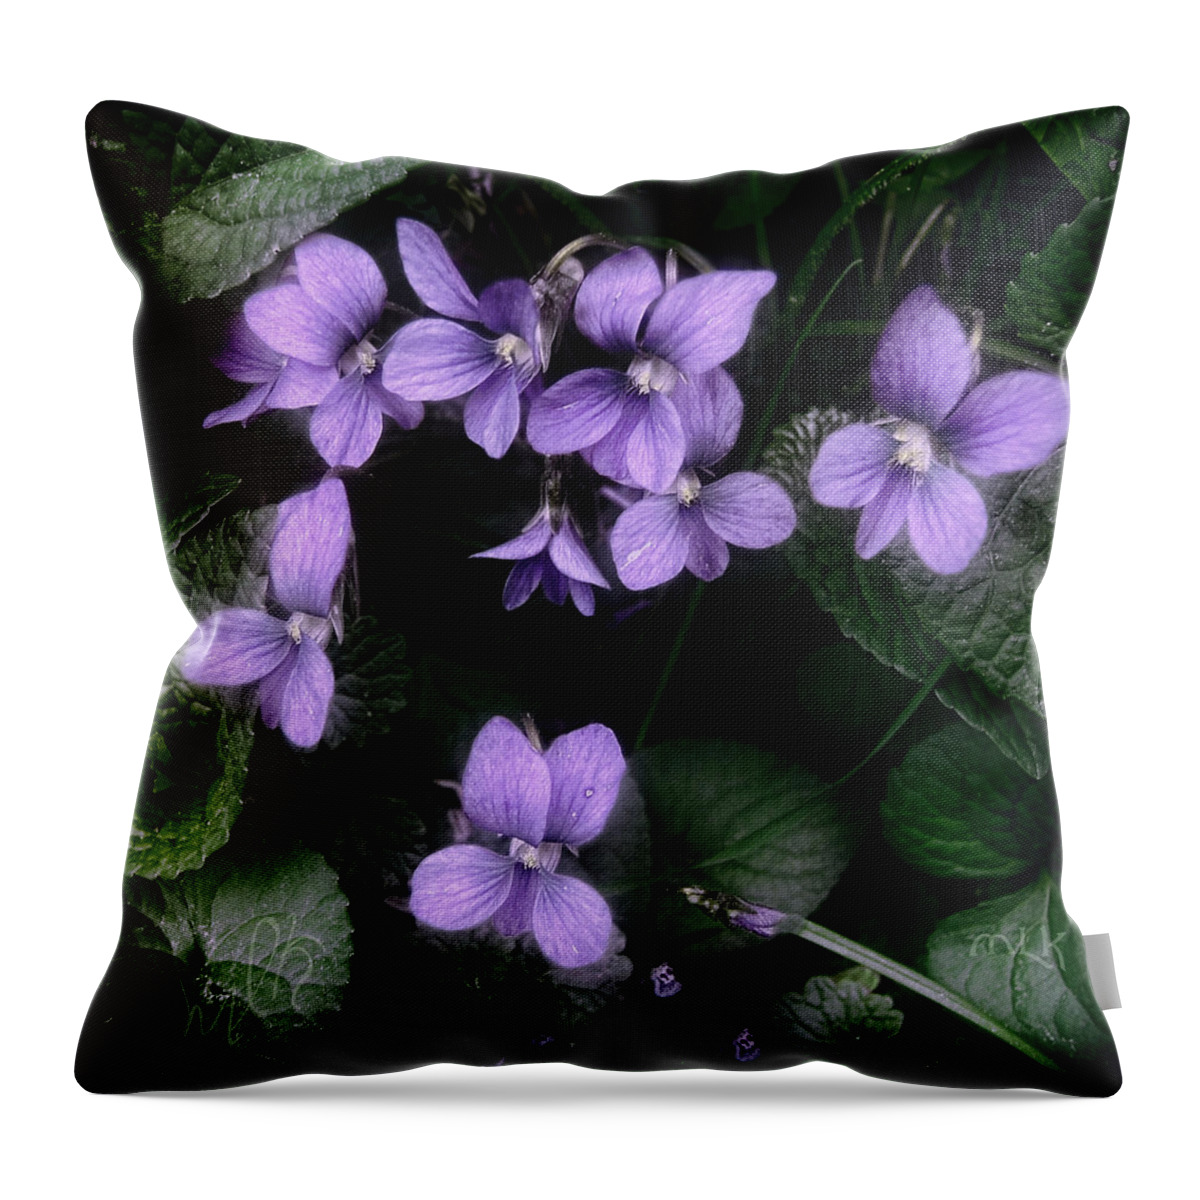 Violet Throw Pillow featuring the photograph Shy Violets by Louise Kumpf